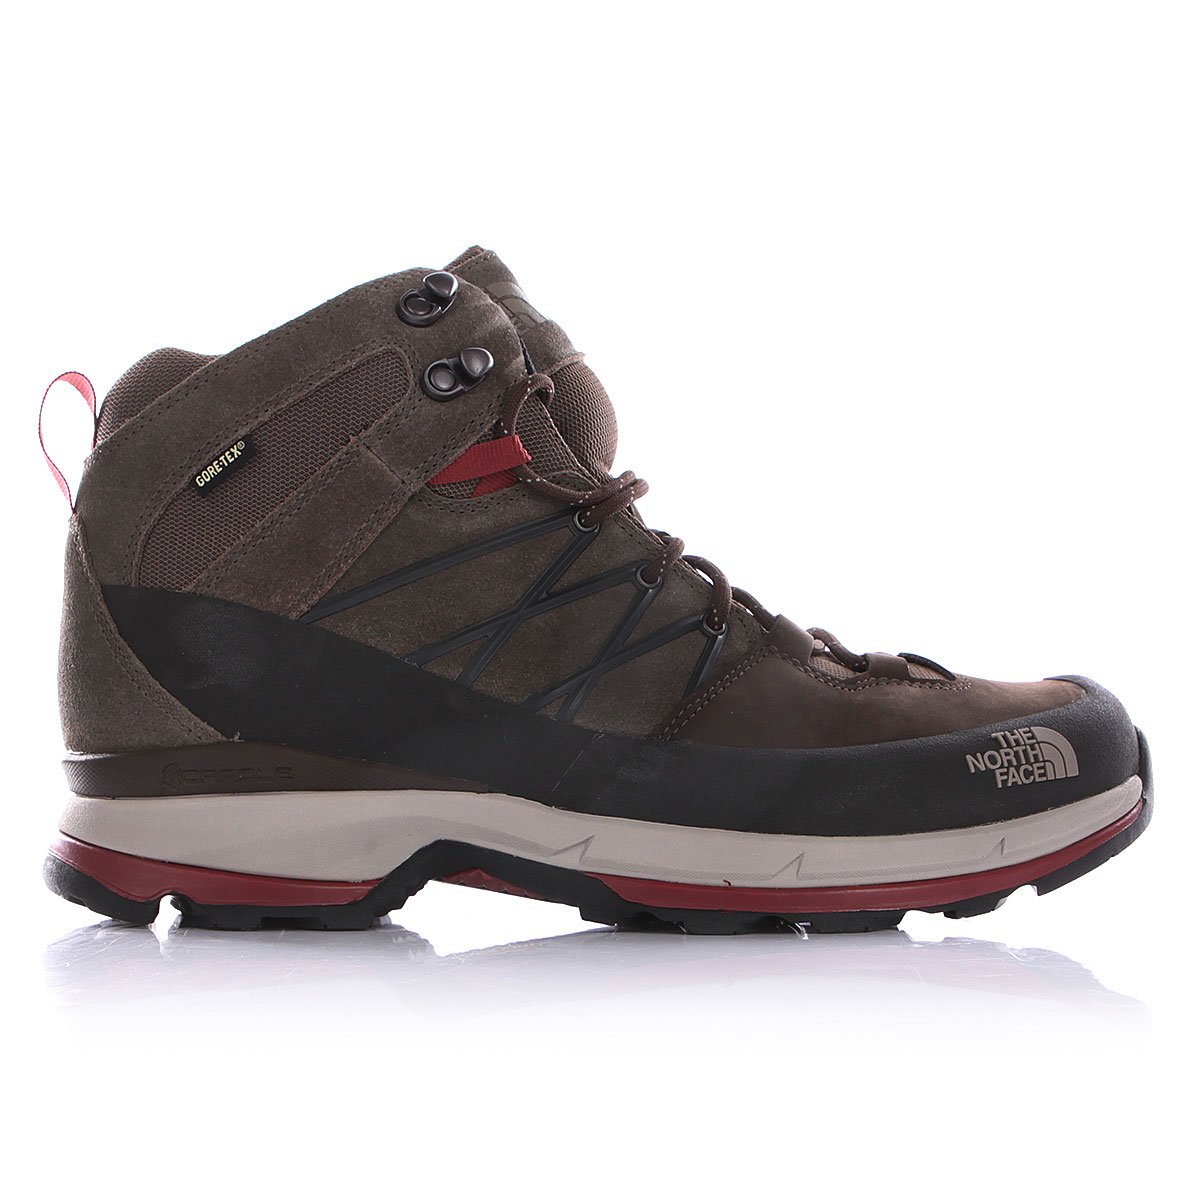 The North Face Wreck Mid Gtx Grey/Black 